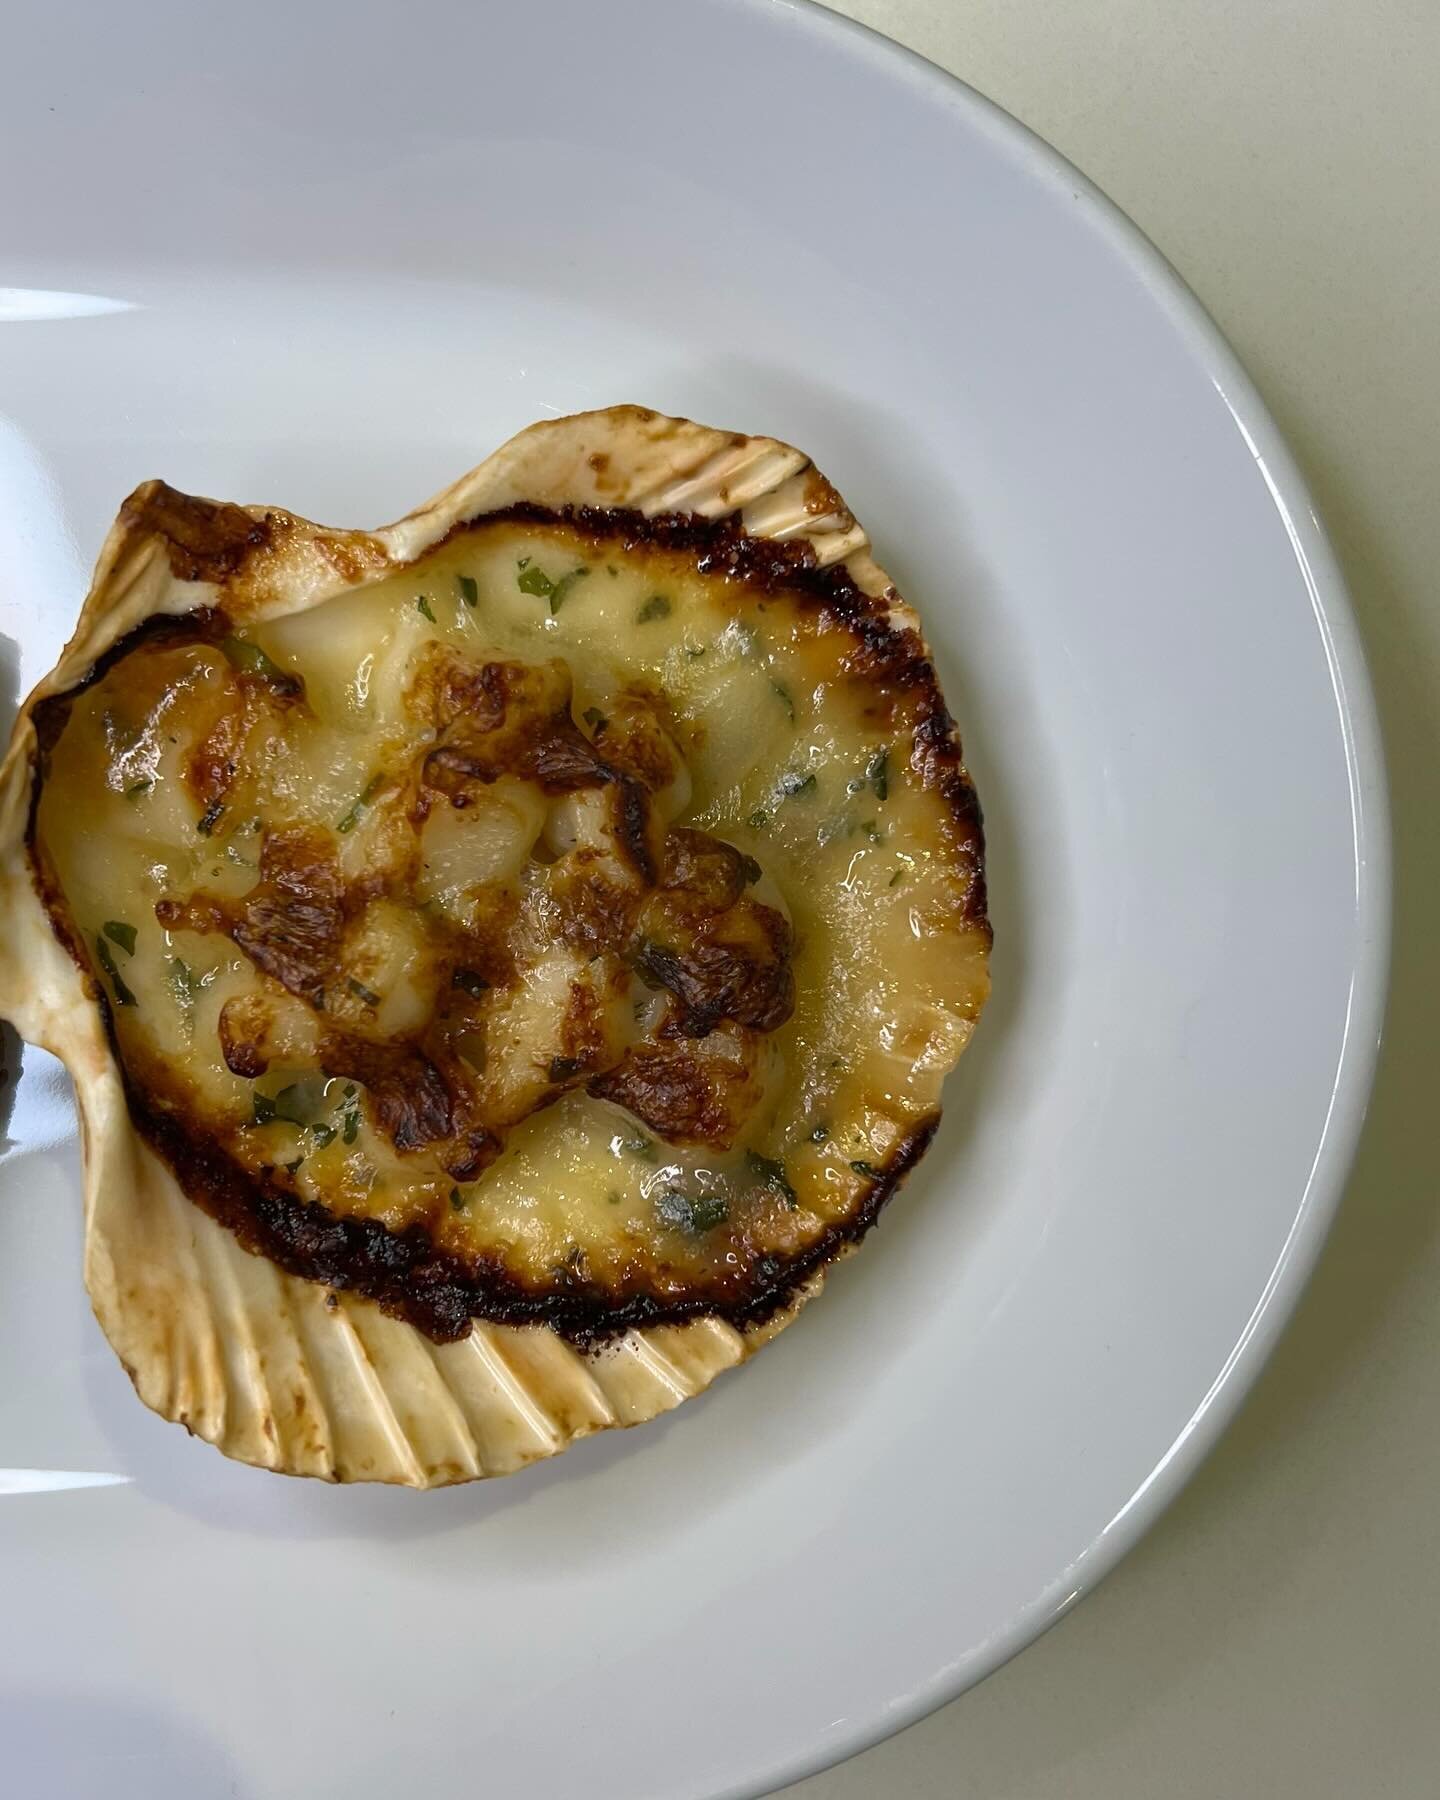 some nights (most nights) i just want appetizers for dinner. a bunch of different small things bc for some reason i think my house is the cheesecake factory. 

i&rsquo;ve been getting these lil scallop gratins (scallop saint jacques if you&rsquo;re n